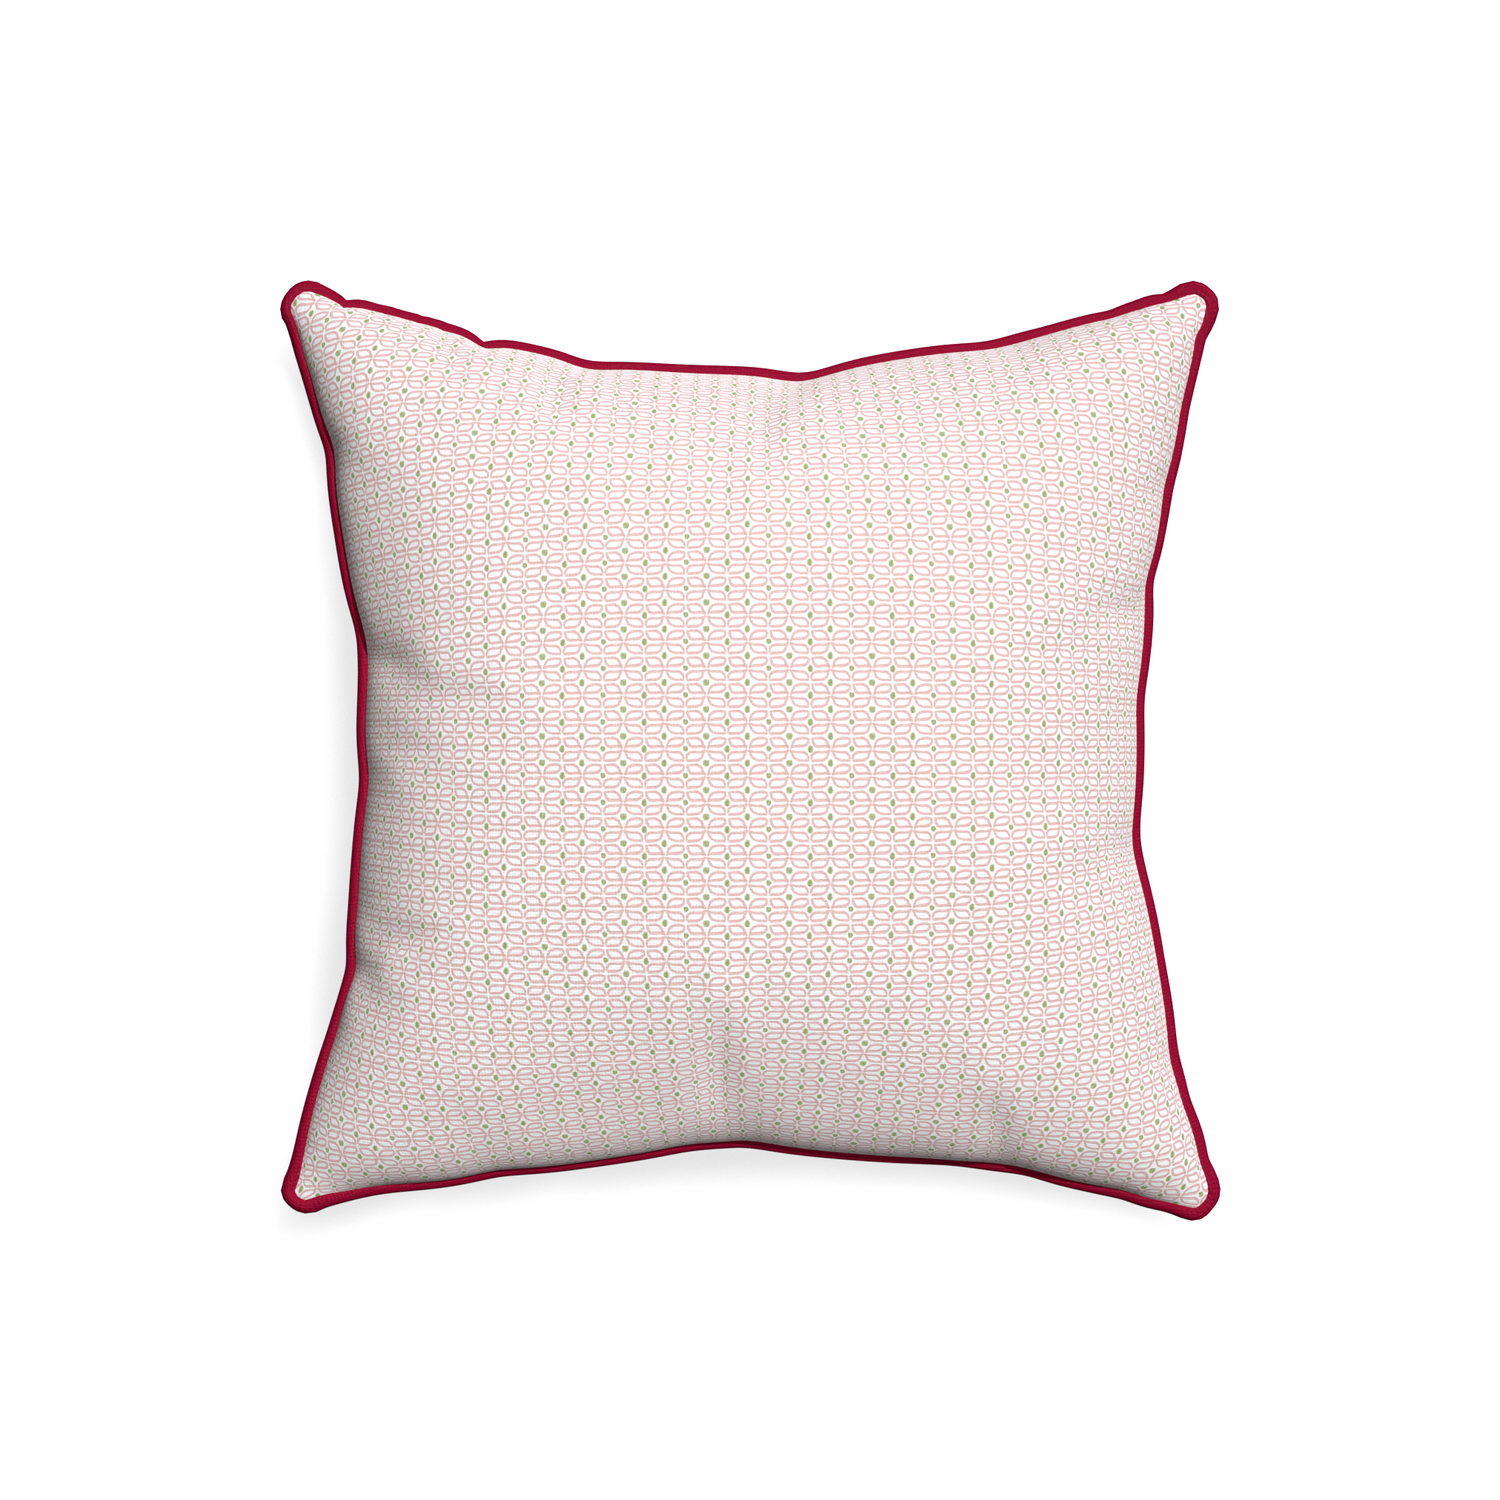 20-square loomi pink custom pink geometricpillow with raspberry piping on white background